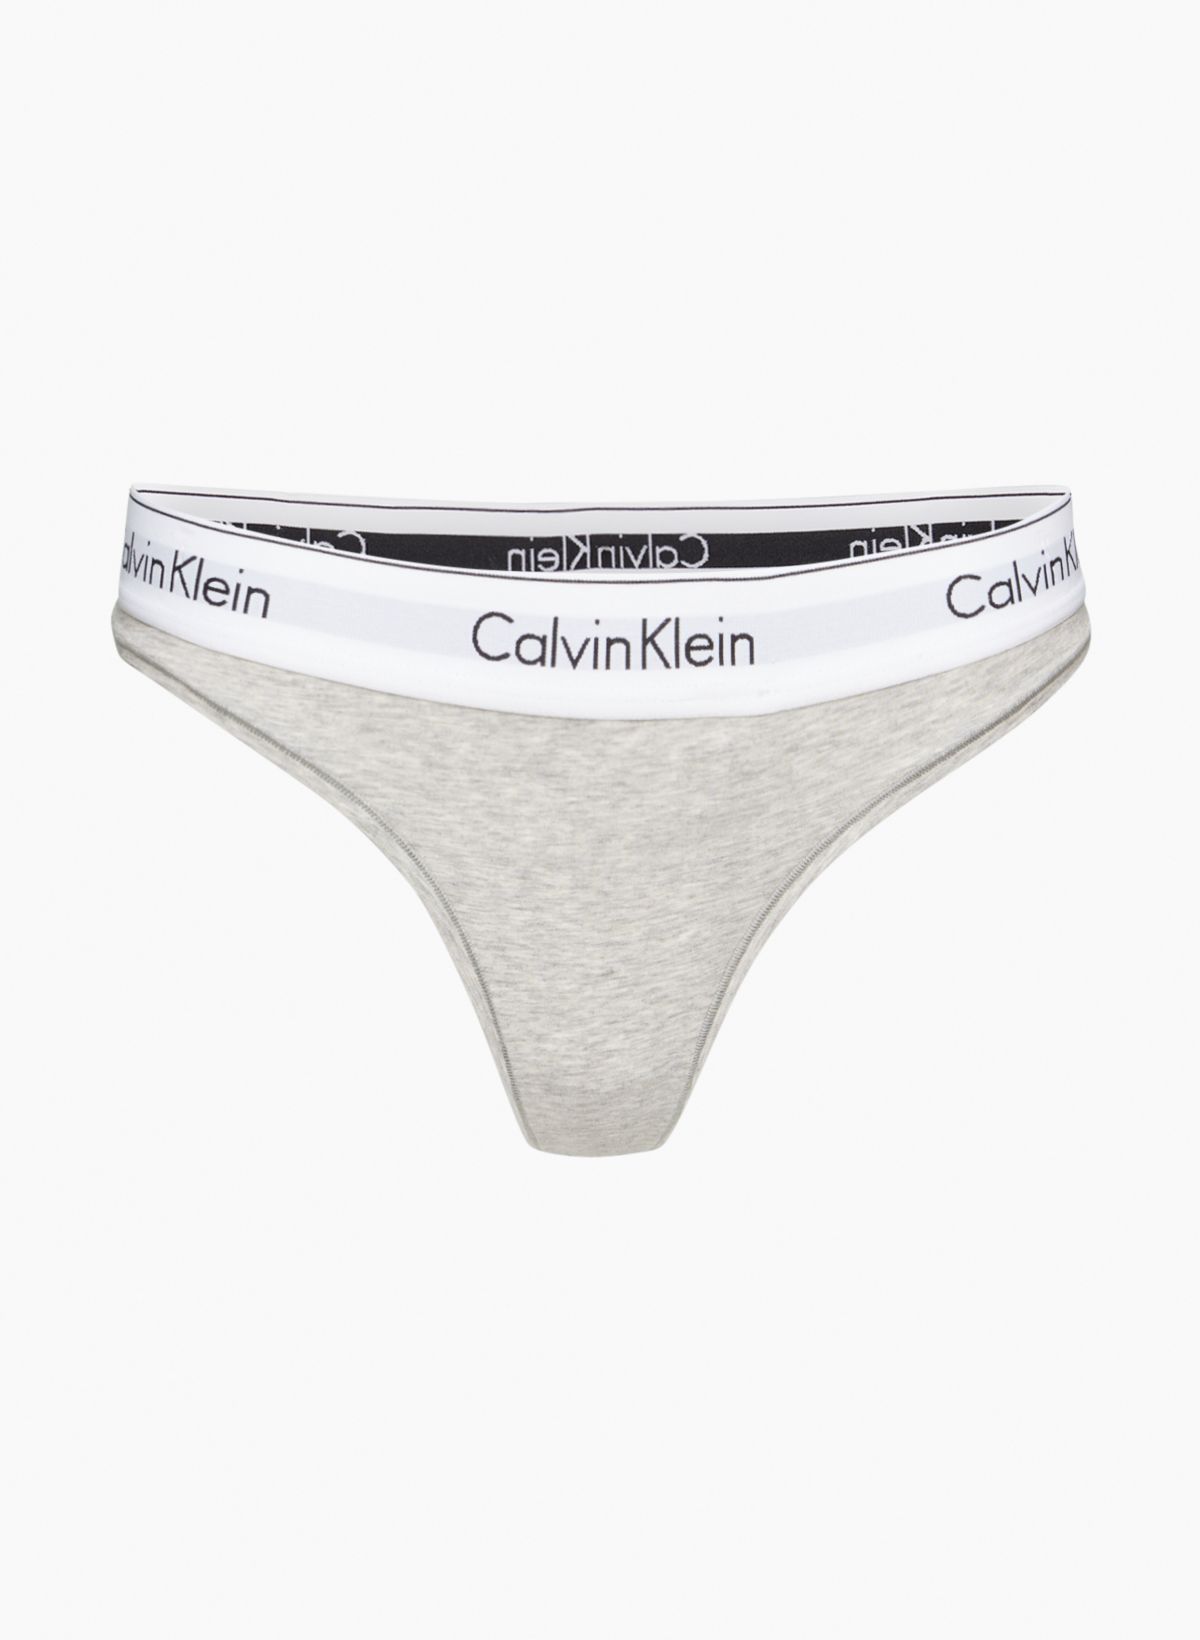 Calvin Klein Store Locator  Find Clothing Stores Near You